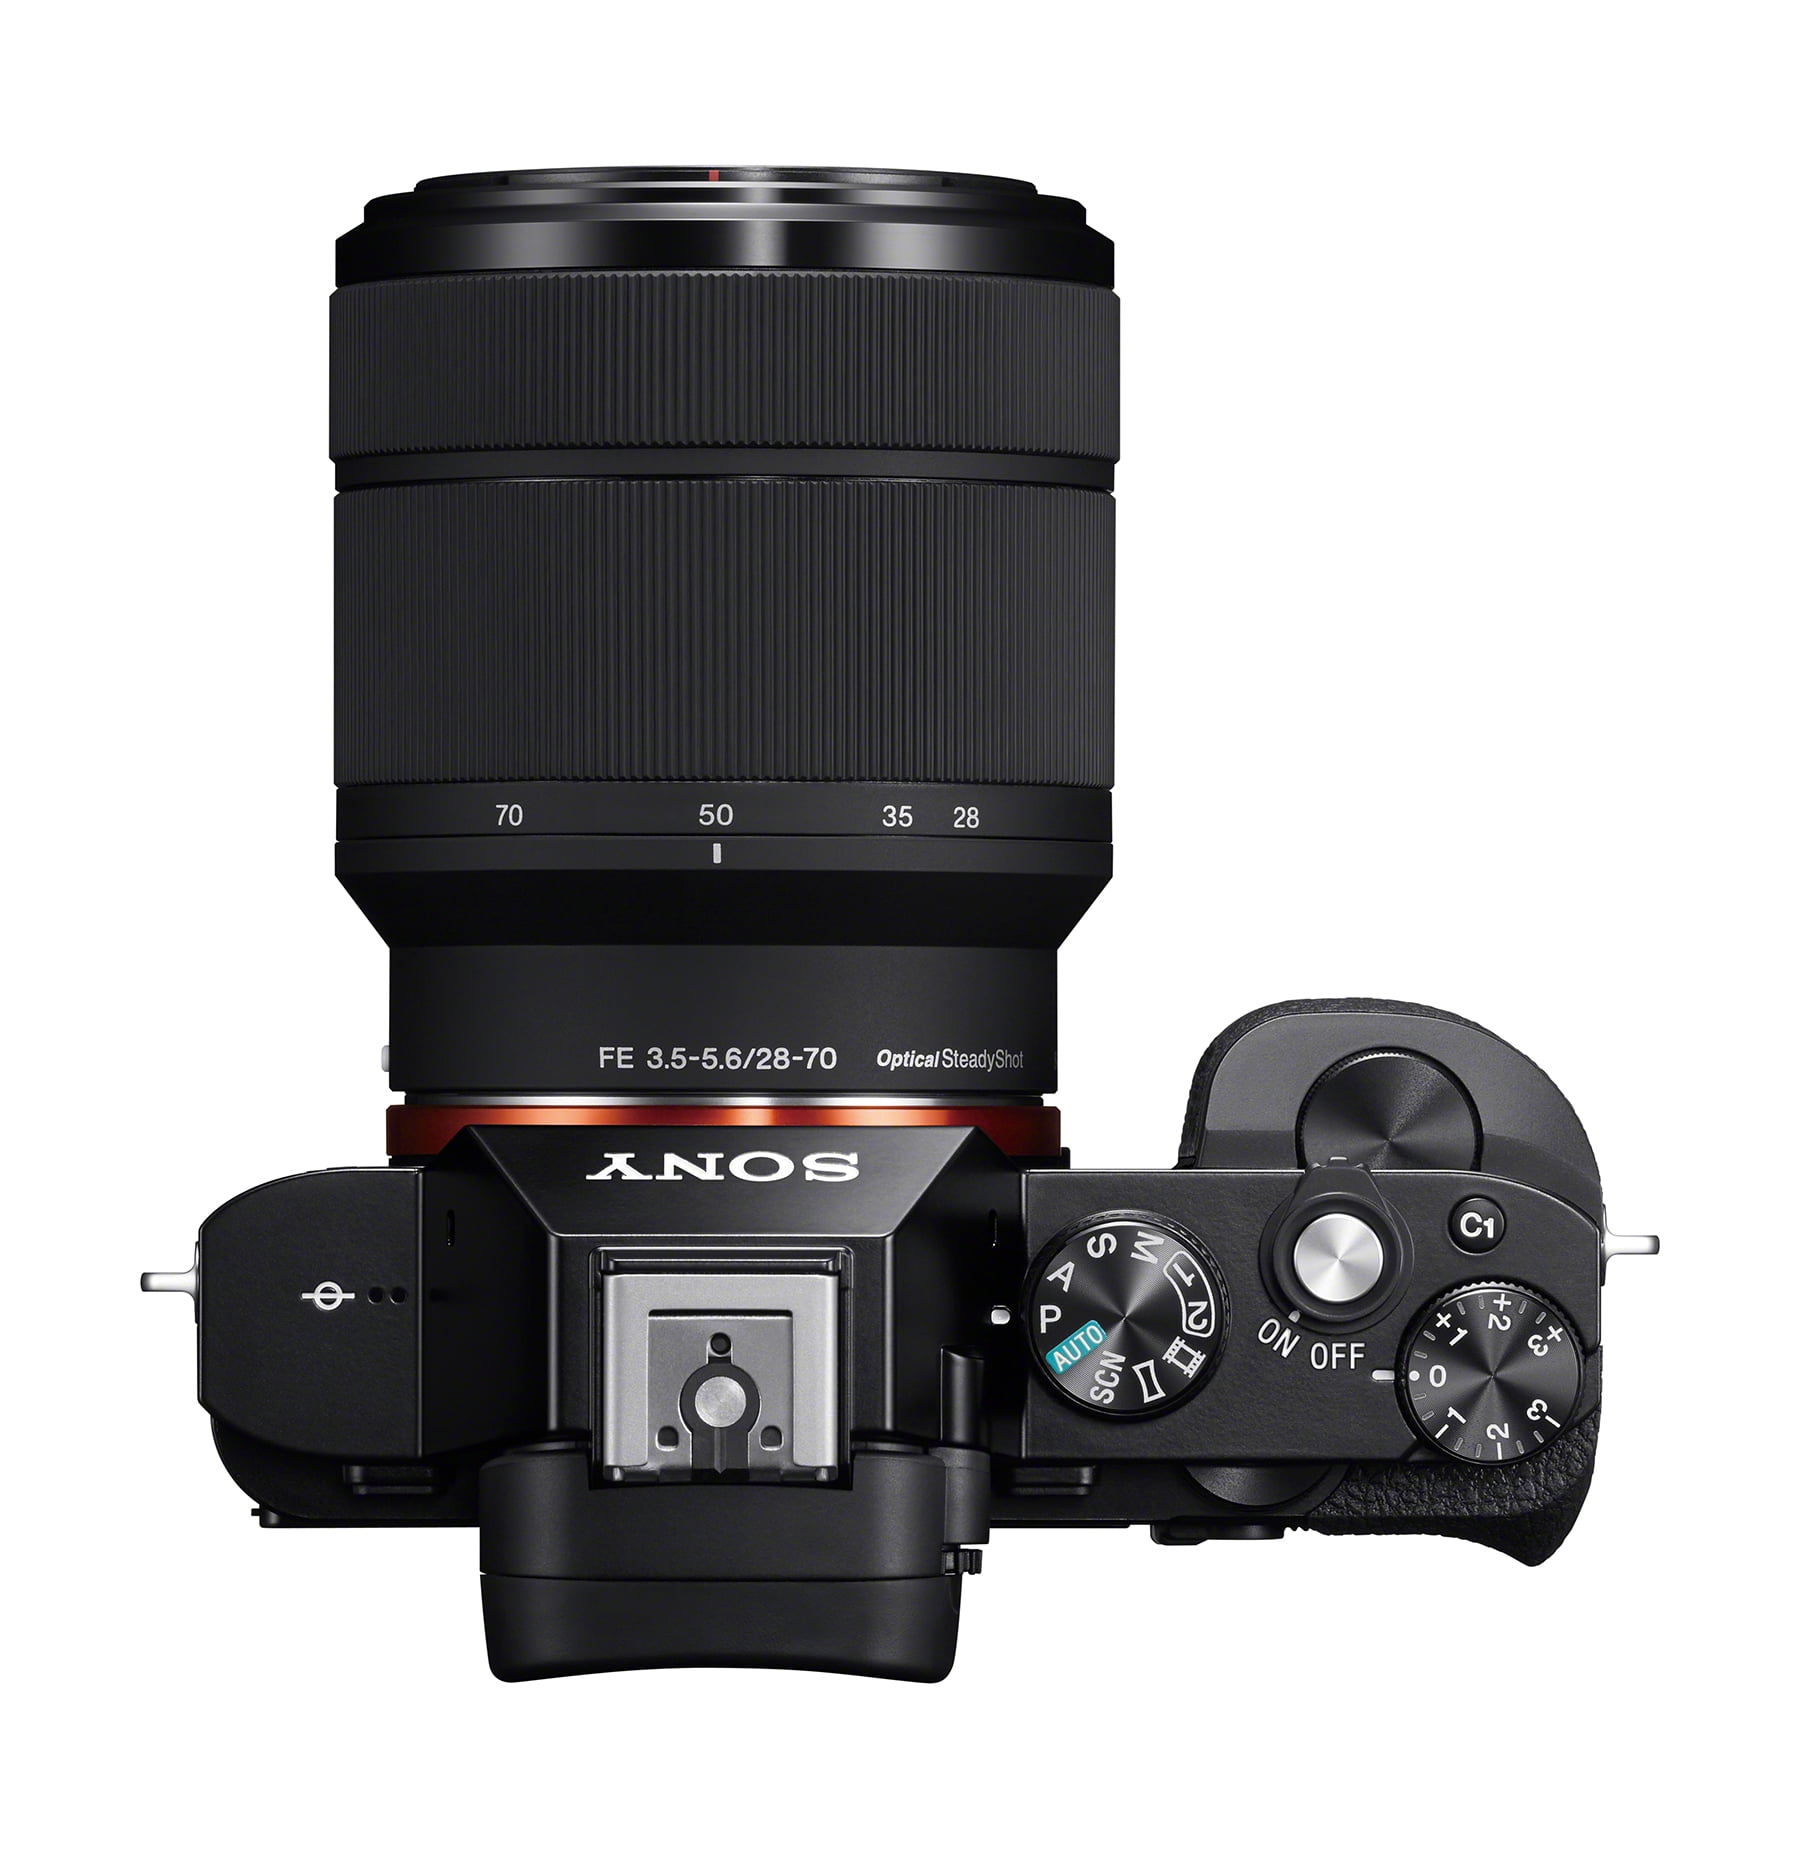 Sony Alpha a7 Digital Camera with Free Accessories ILCE7/B A